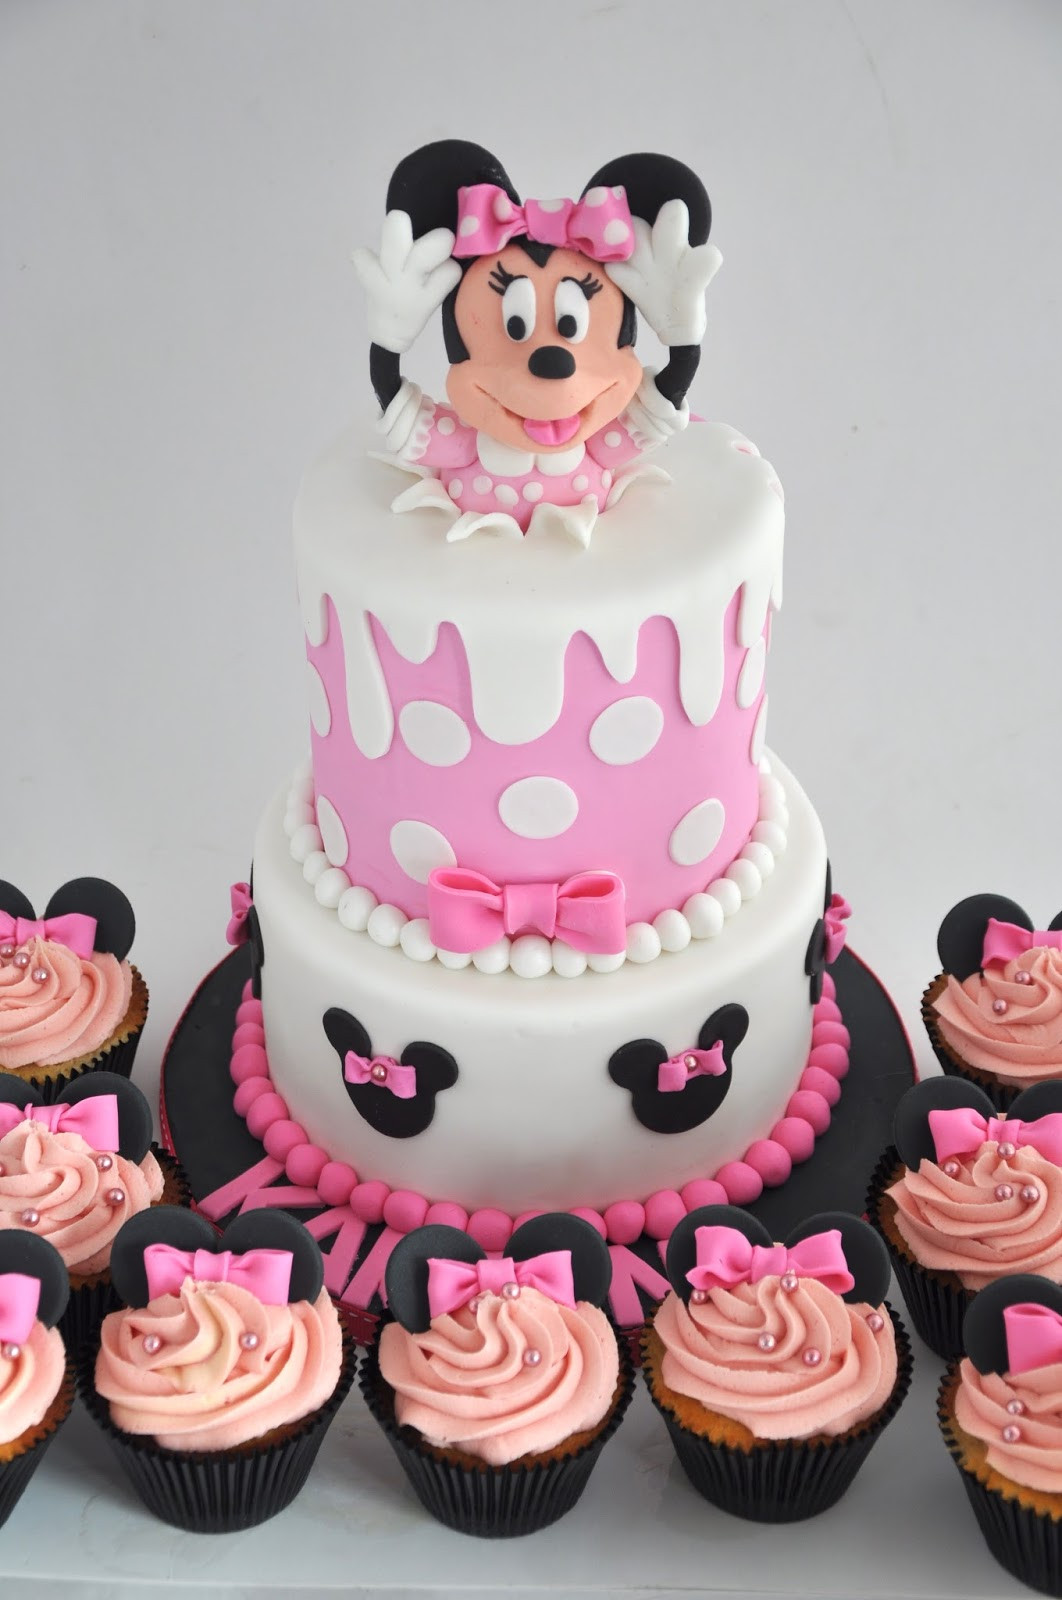 Minnie Mouse Birthday Cake
 Rozanne s Cakes Minnie mouse birthday cake and cupcakes